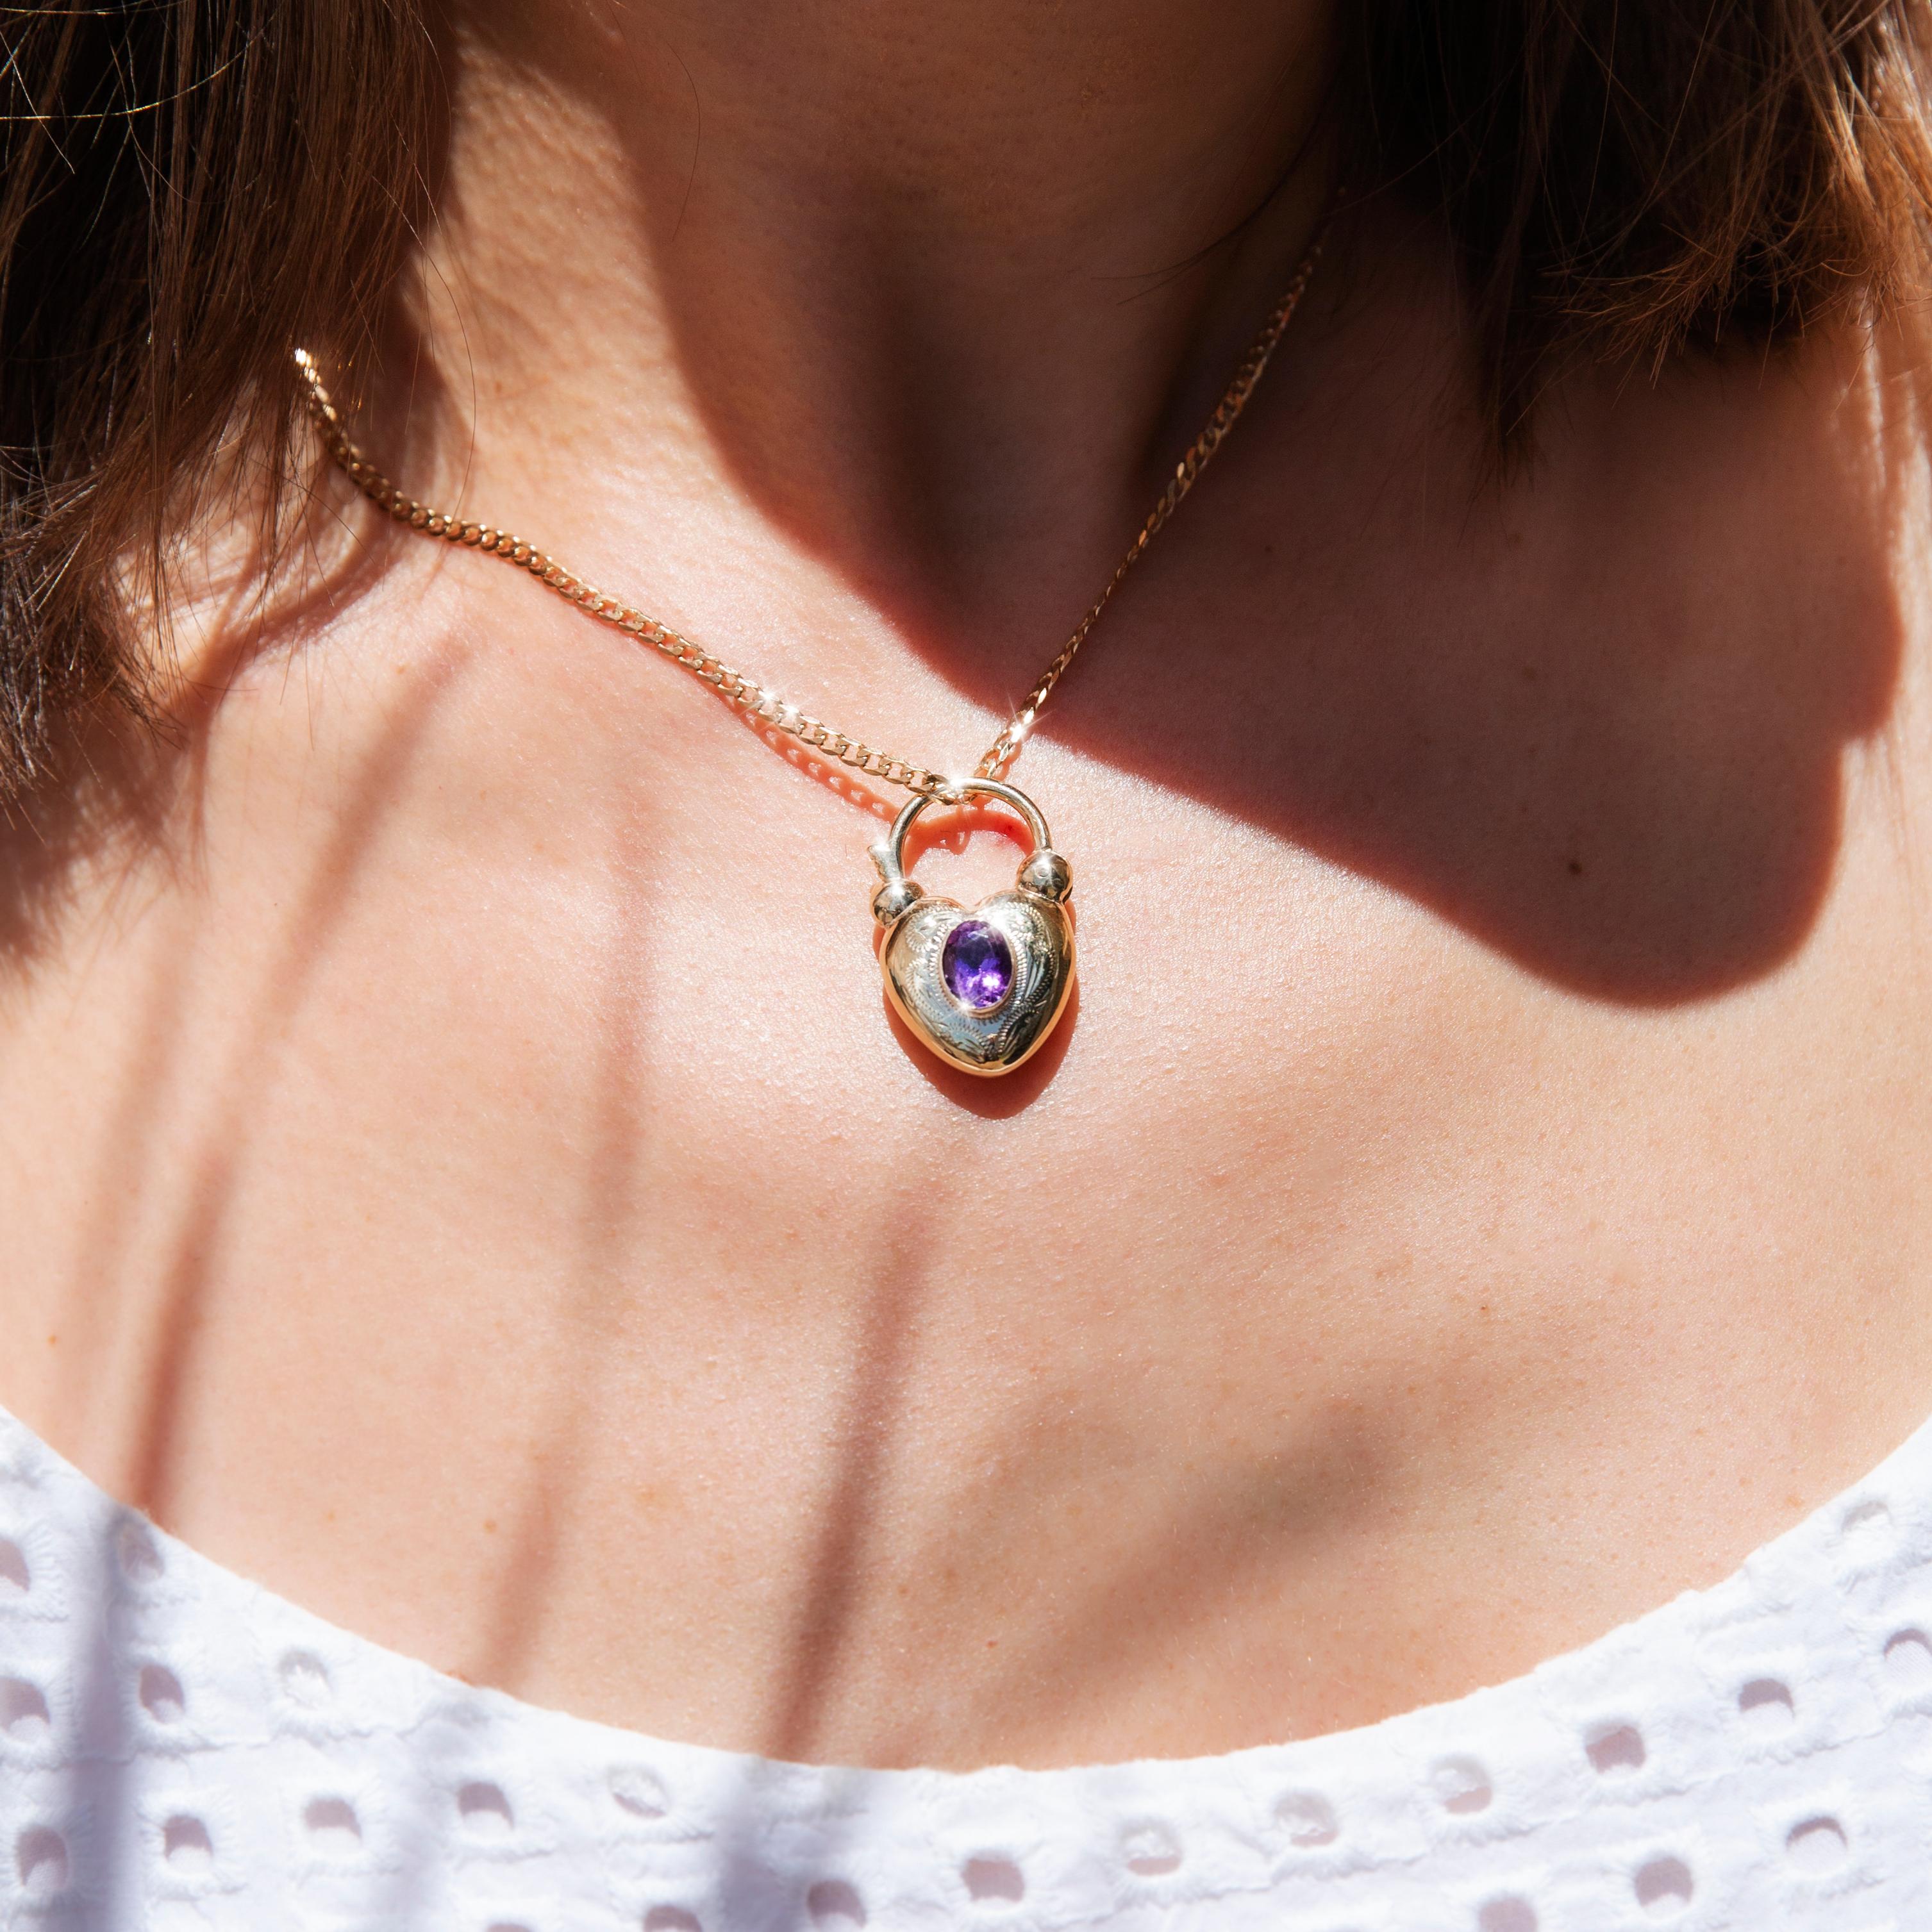 Forged in 9 carat yellow gold, this gorgeous vintage adornment, circa 1970s, is a delightful heart-shaped pendant holding an enchanting oval cut deep purple amethyst in a rubover setting. We have named this lovely vintage piece The Abbey Pendant &